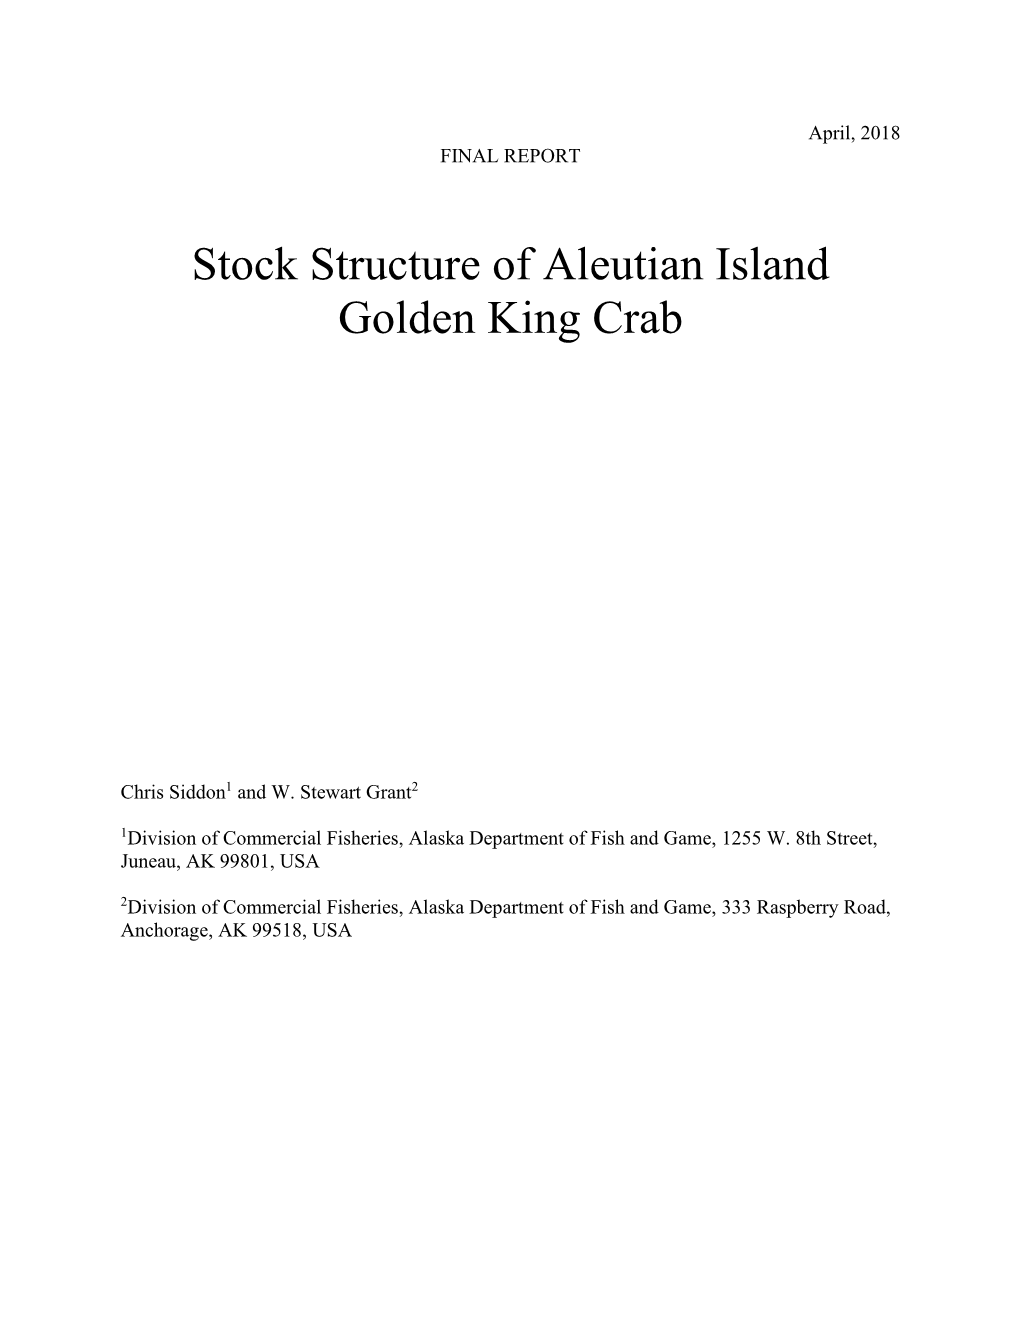 Stock Structure of Aleutian Island Golden King Crab